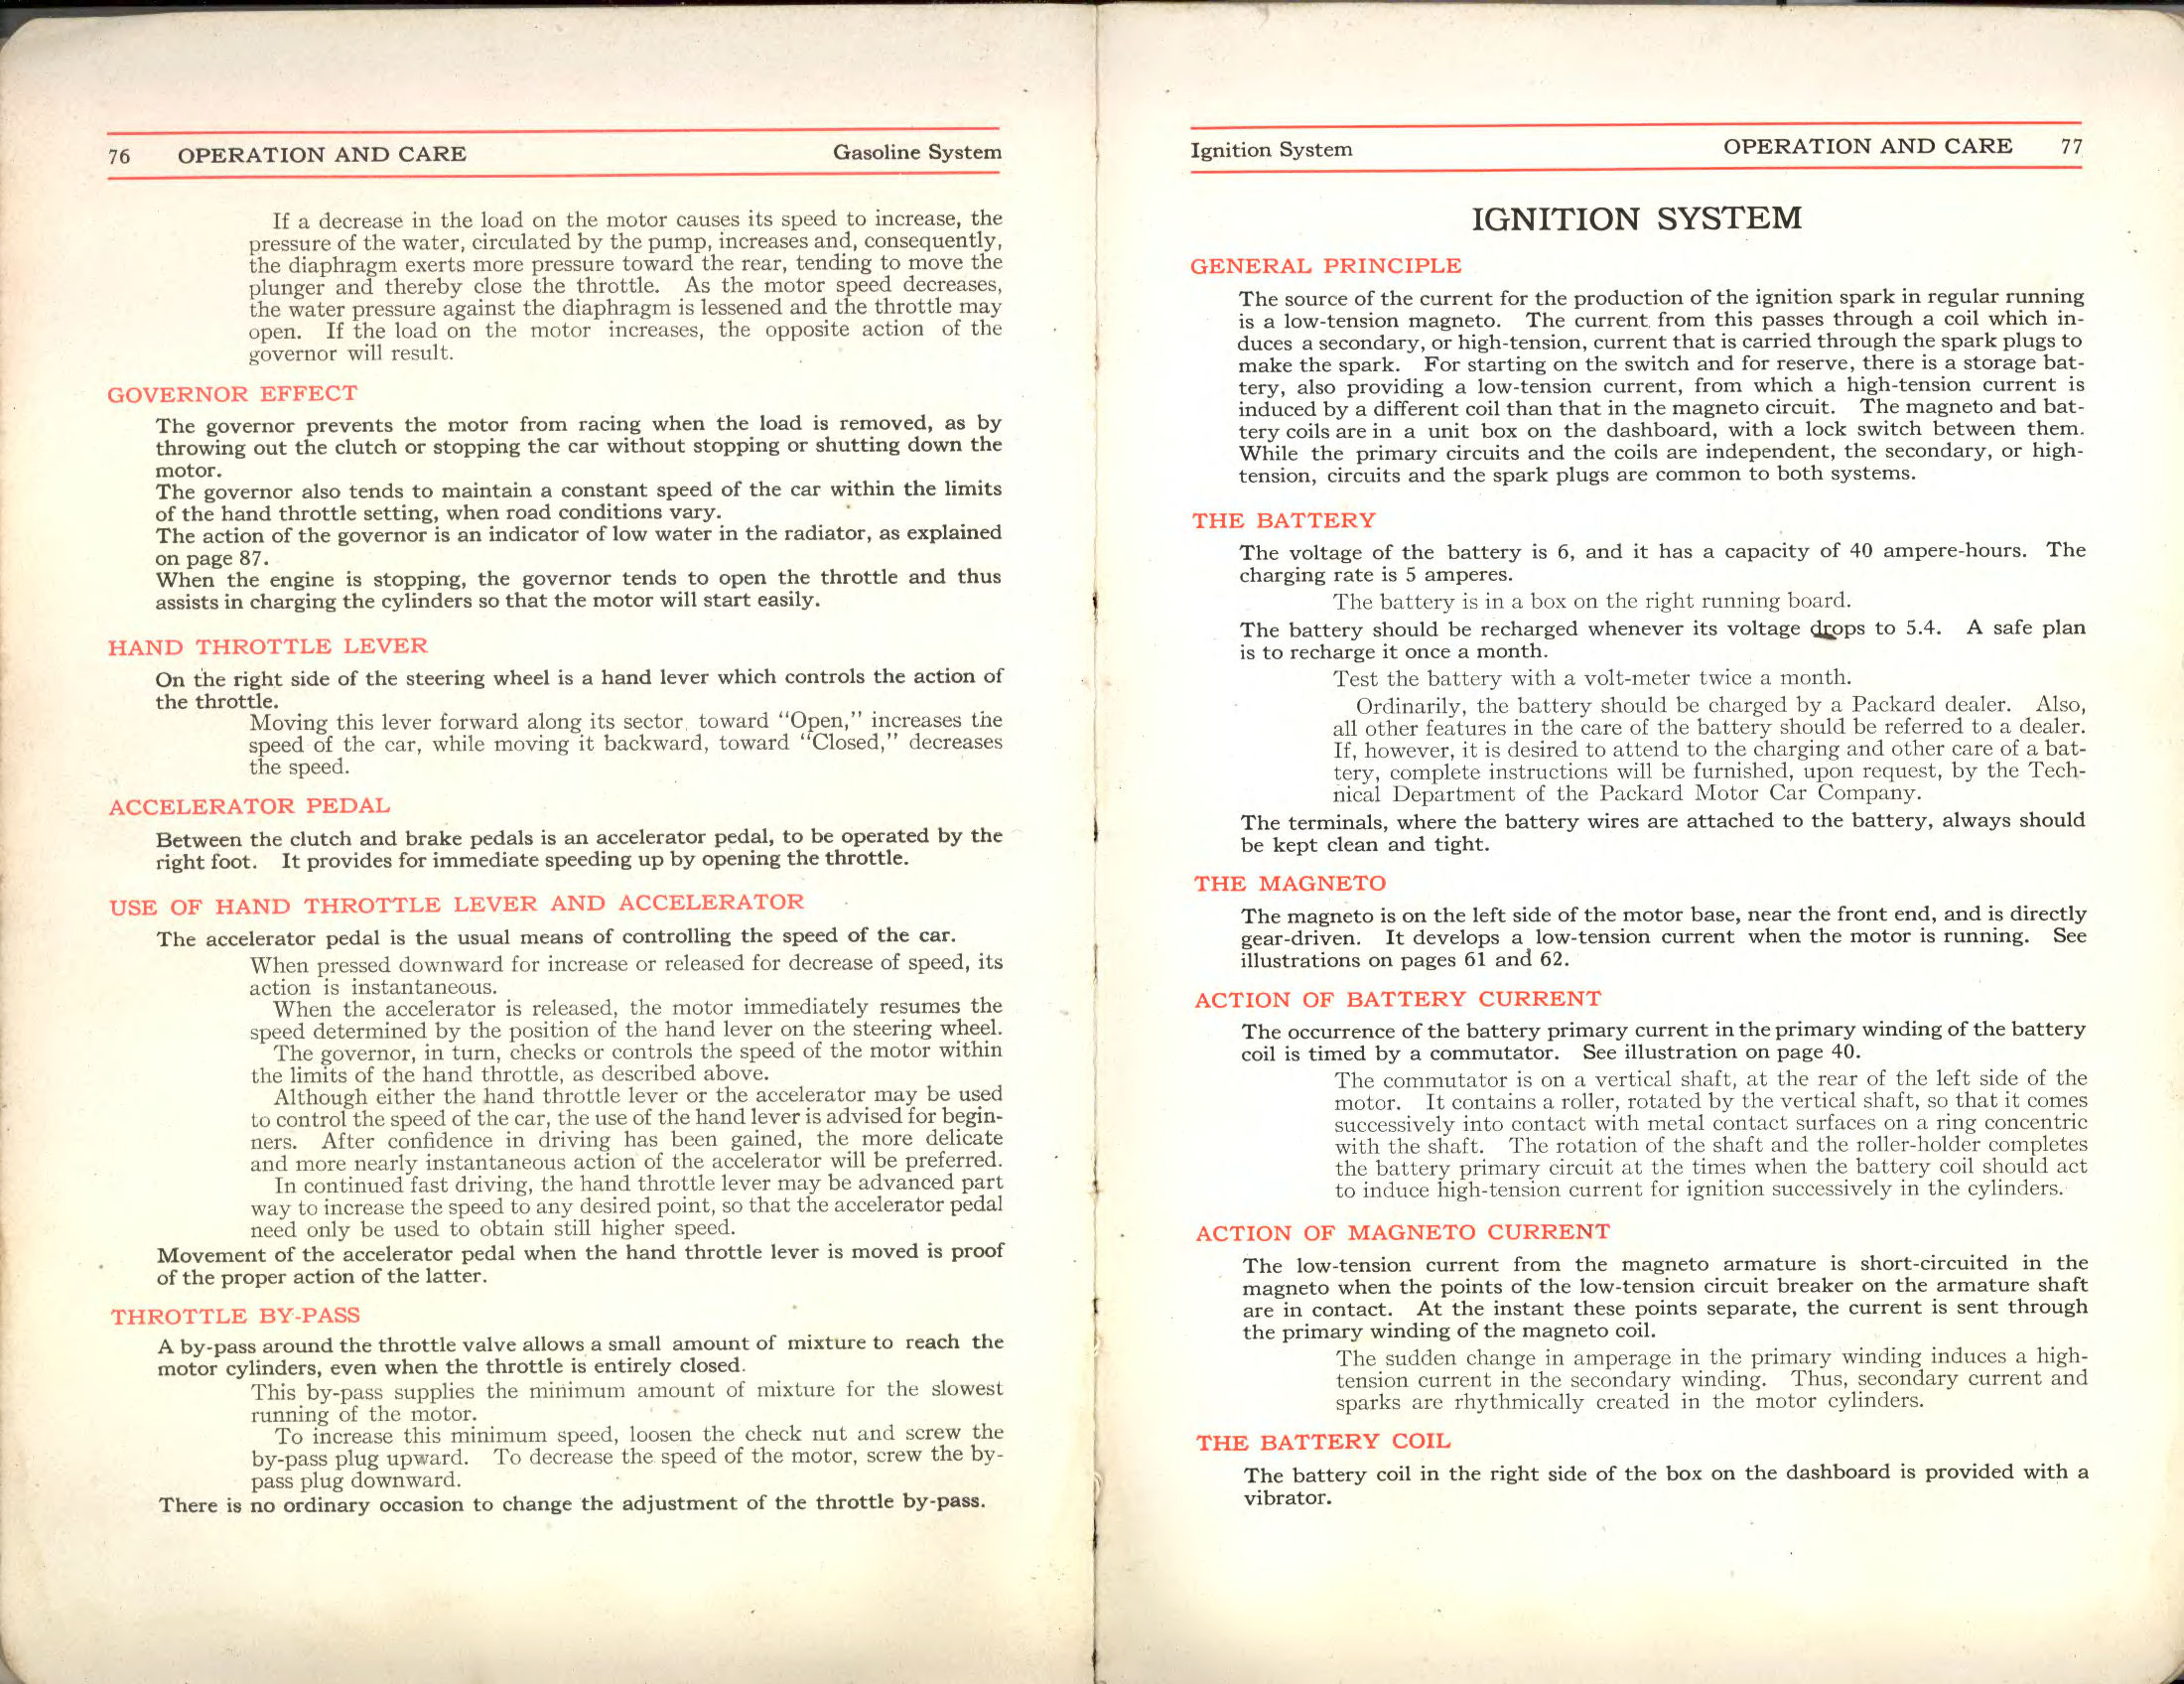 1911 Packard Owners Manual Page 50